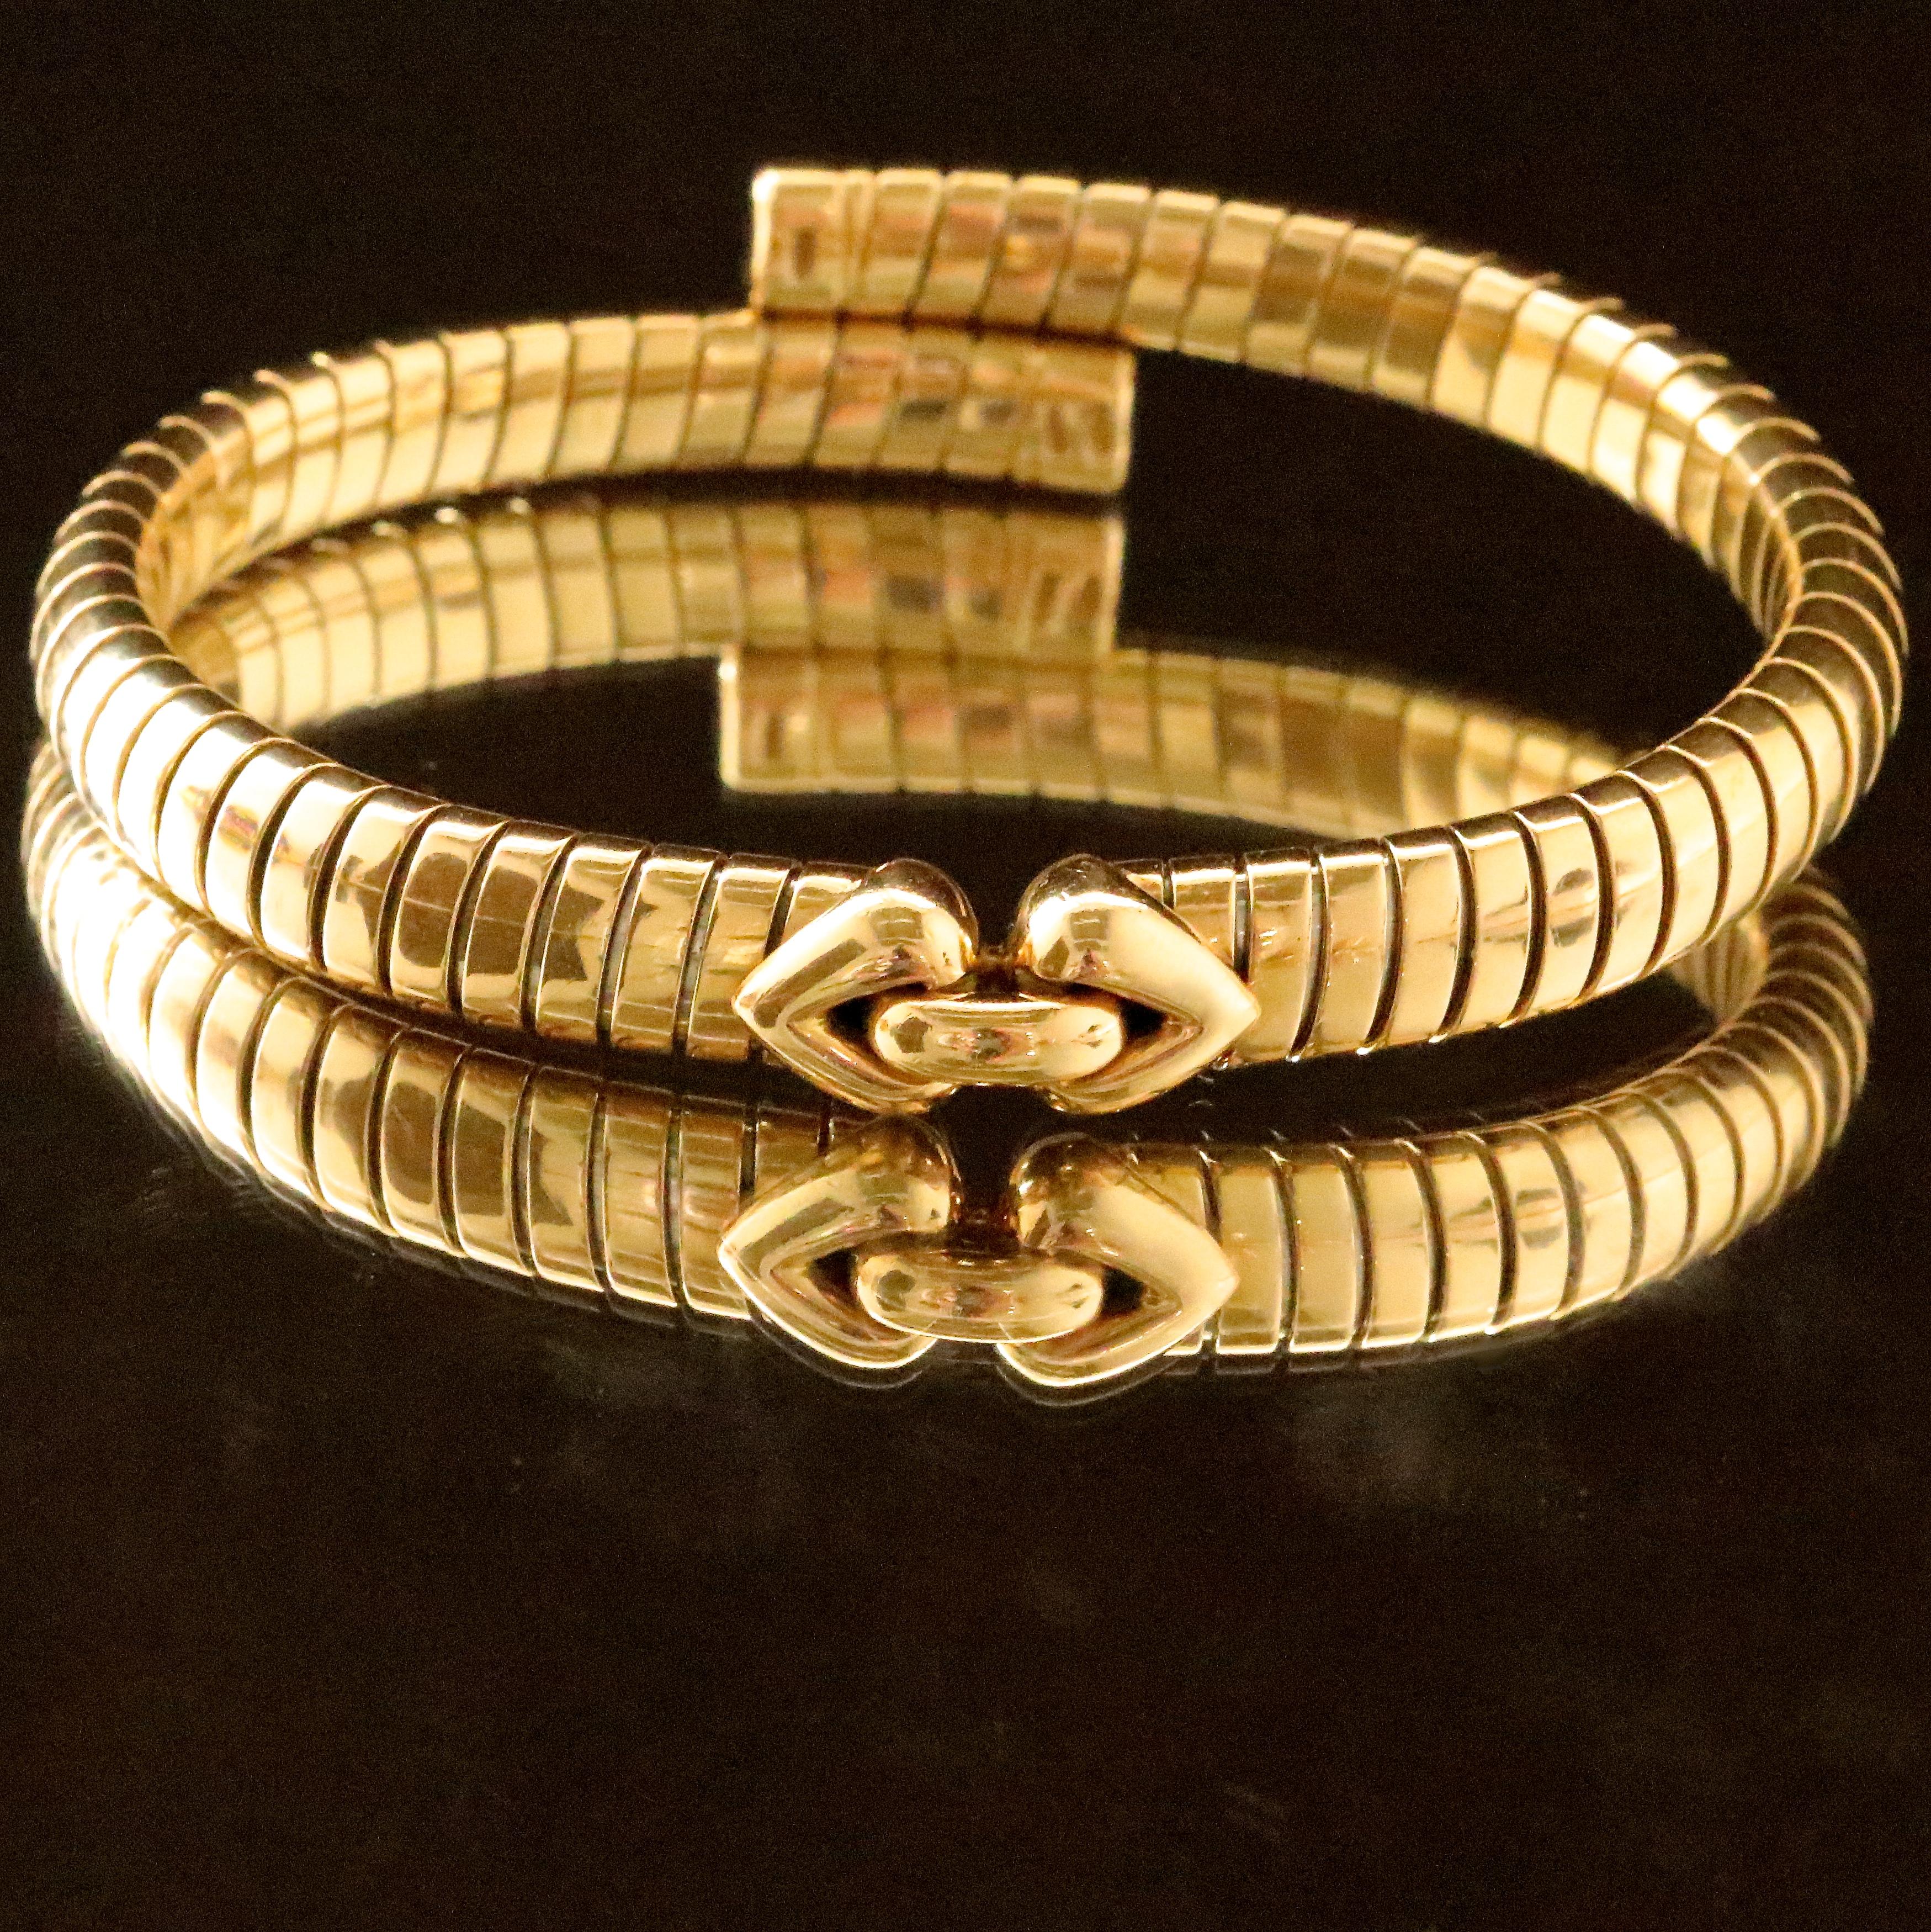 Just like a significant other, this bracelet wraps around your wrist gently, yet securely. Bulgari was inspired by serpents and archaic Roman techniques of twisting twines to create the famous Tubogas collection. Become the lucky owner of the rare